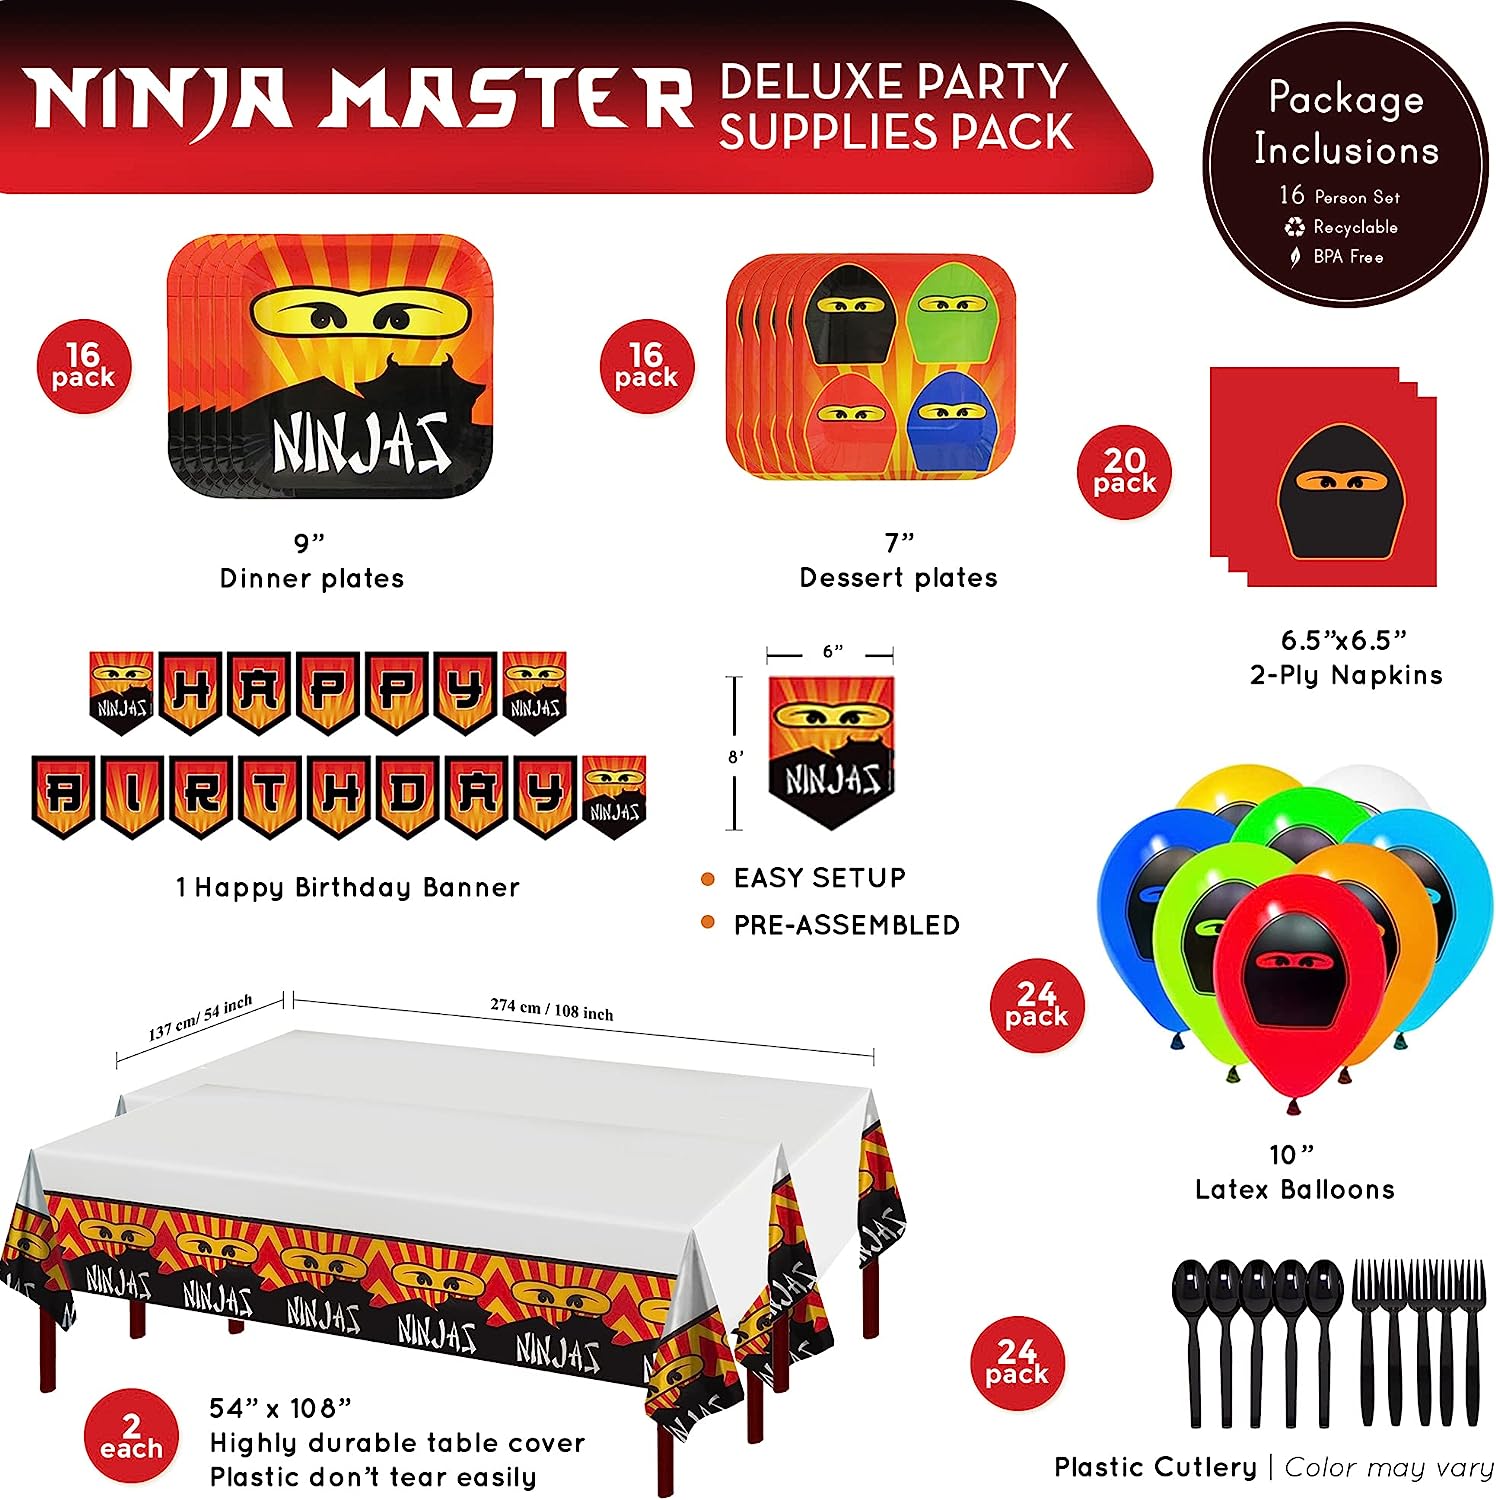 Image of a complete party supplies pack with a Ninja Master theme, including 16 paper dinner plates, 16 paper dessert plates, 20 paper lunch napkins, 1 happy birthday banner, 24 latex balloons, 2 plastic table covers measuring 54"x 108" each, 24 plastic forks, and 24 plastic spoons.